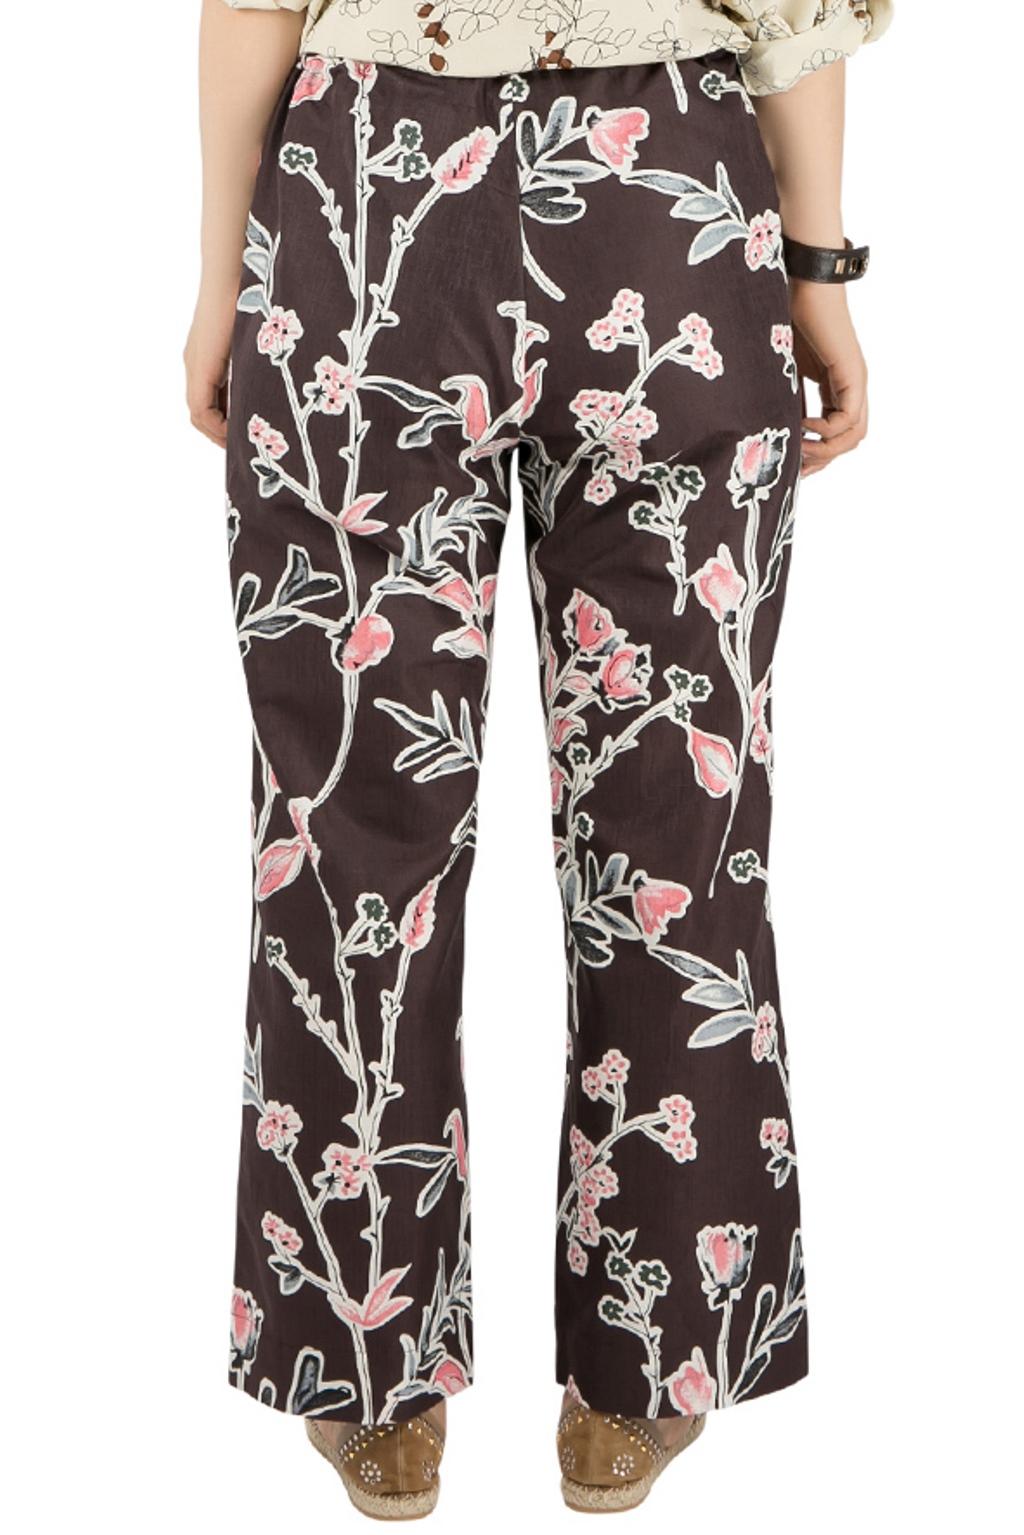 Tailored from cotton and silk, these wide leg trousers are designed by Marni. In a burgundy color, the piece features beautiful honan kew print all over. It comes with two external pockets and a tie-up waistband detail. The creation offers ultimate